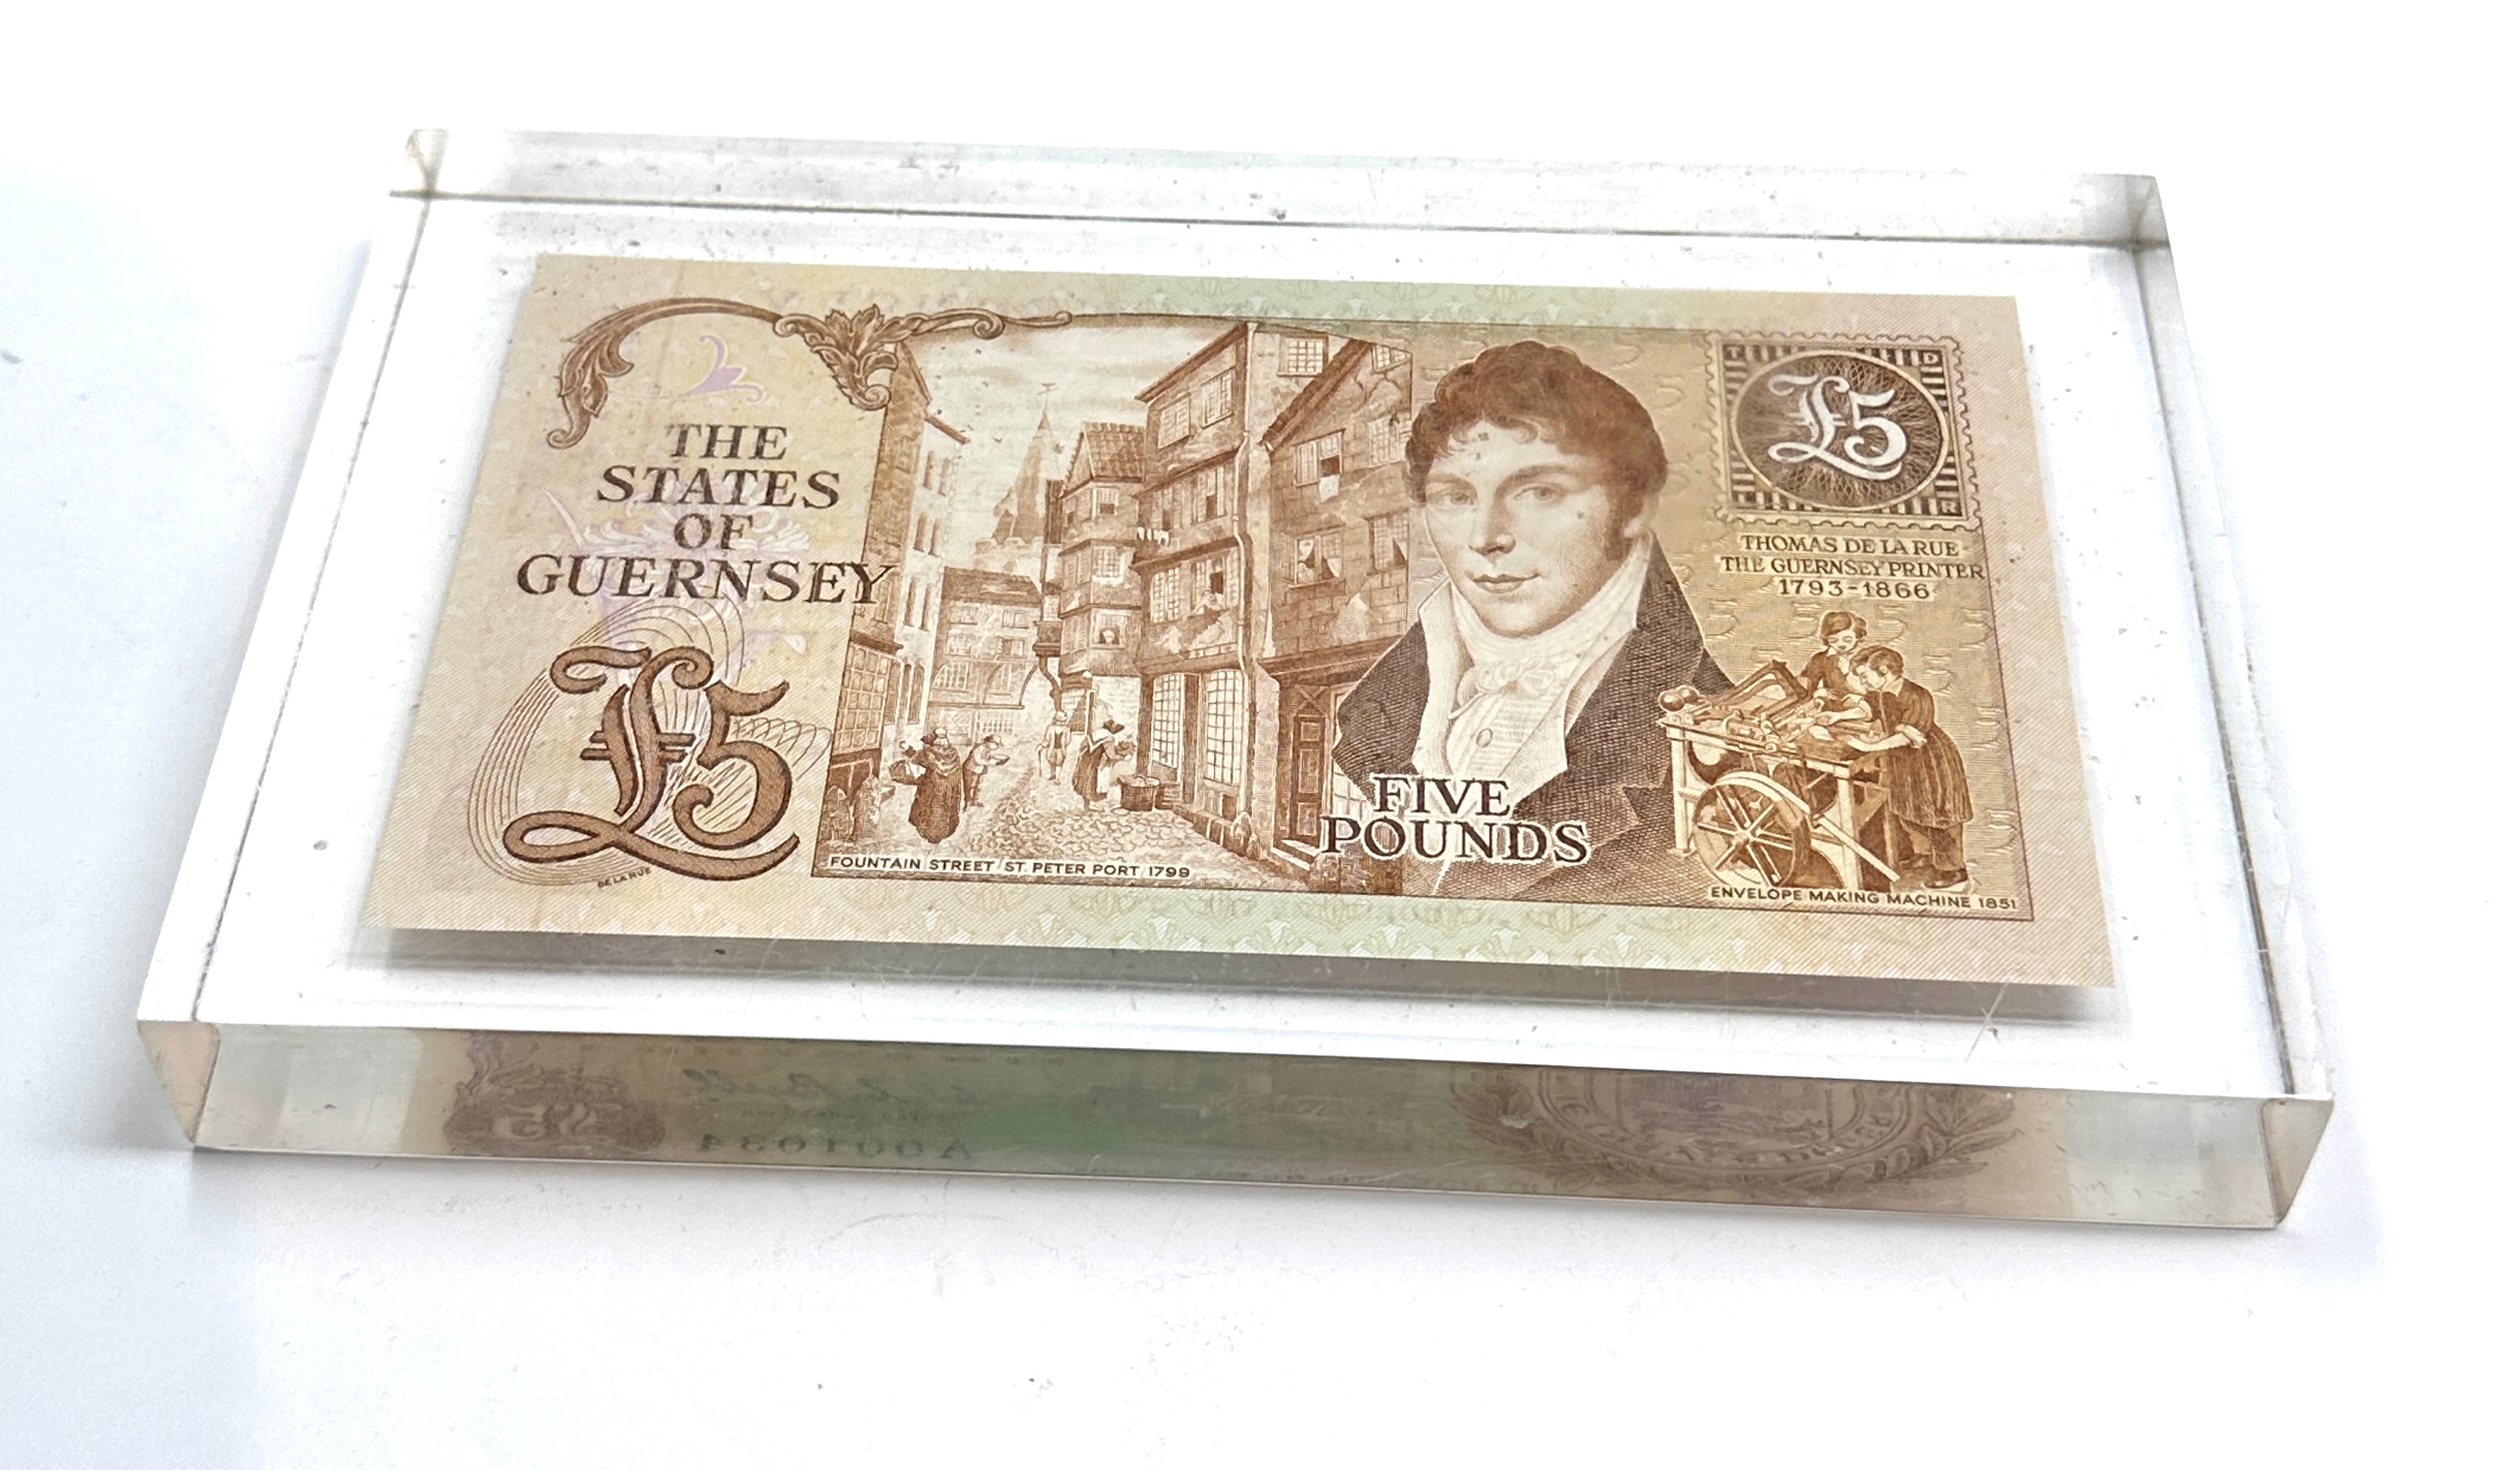 1980 Guernsey £5 Pounds A001034 | UNC | W C Bull | low Serial Number slabbed - Image 2 of 4